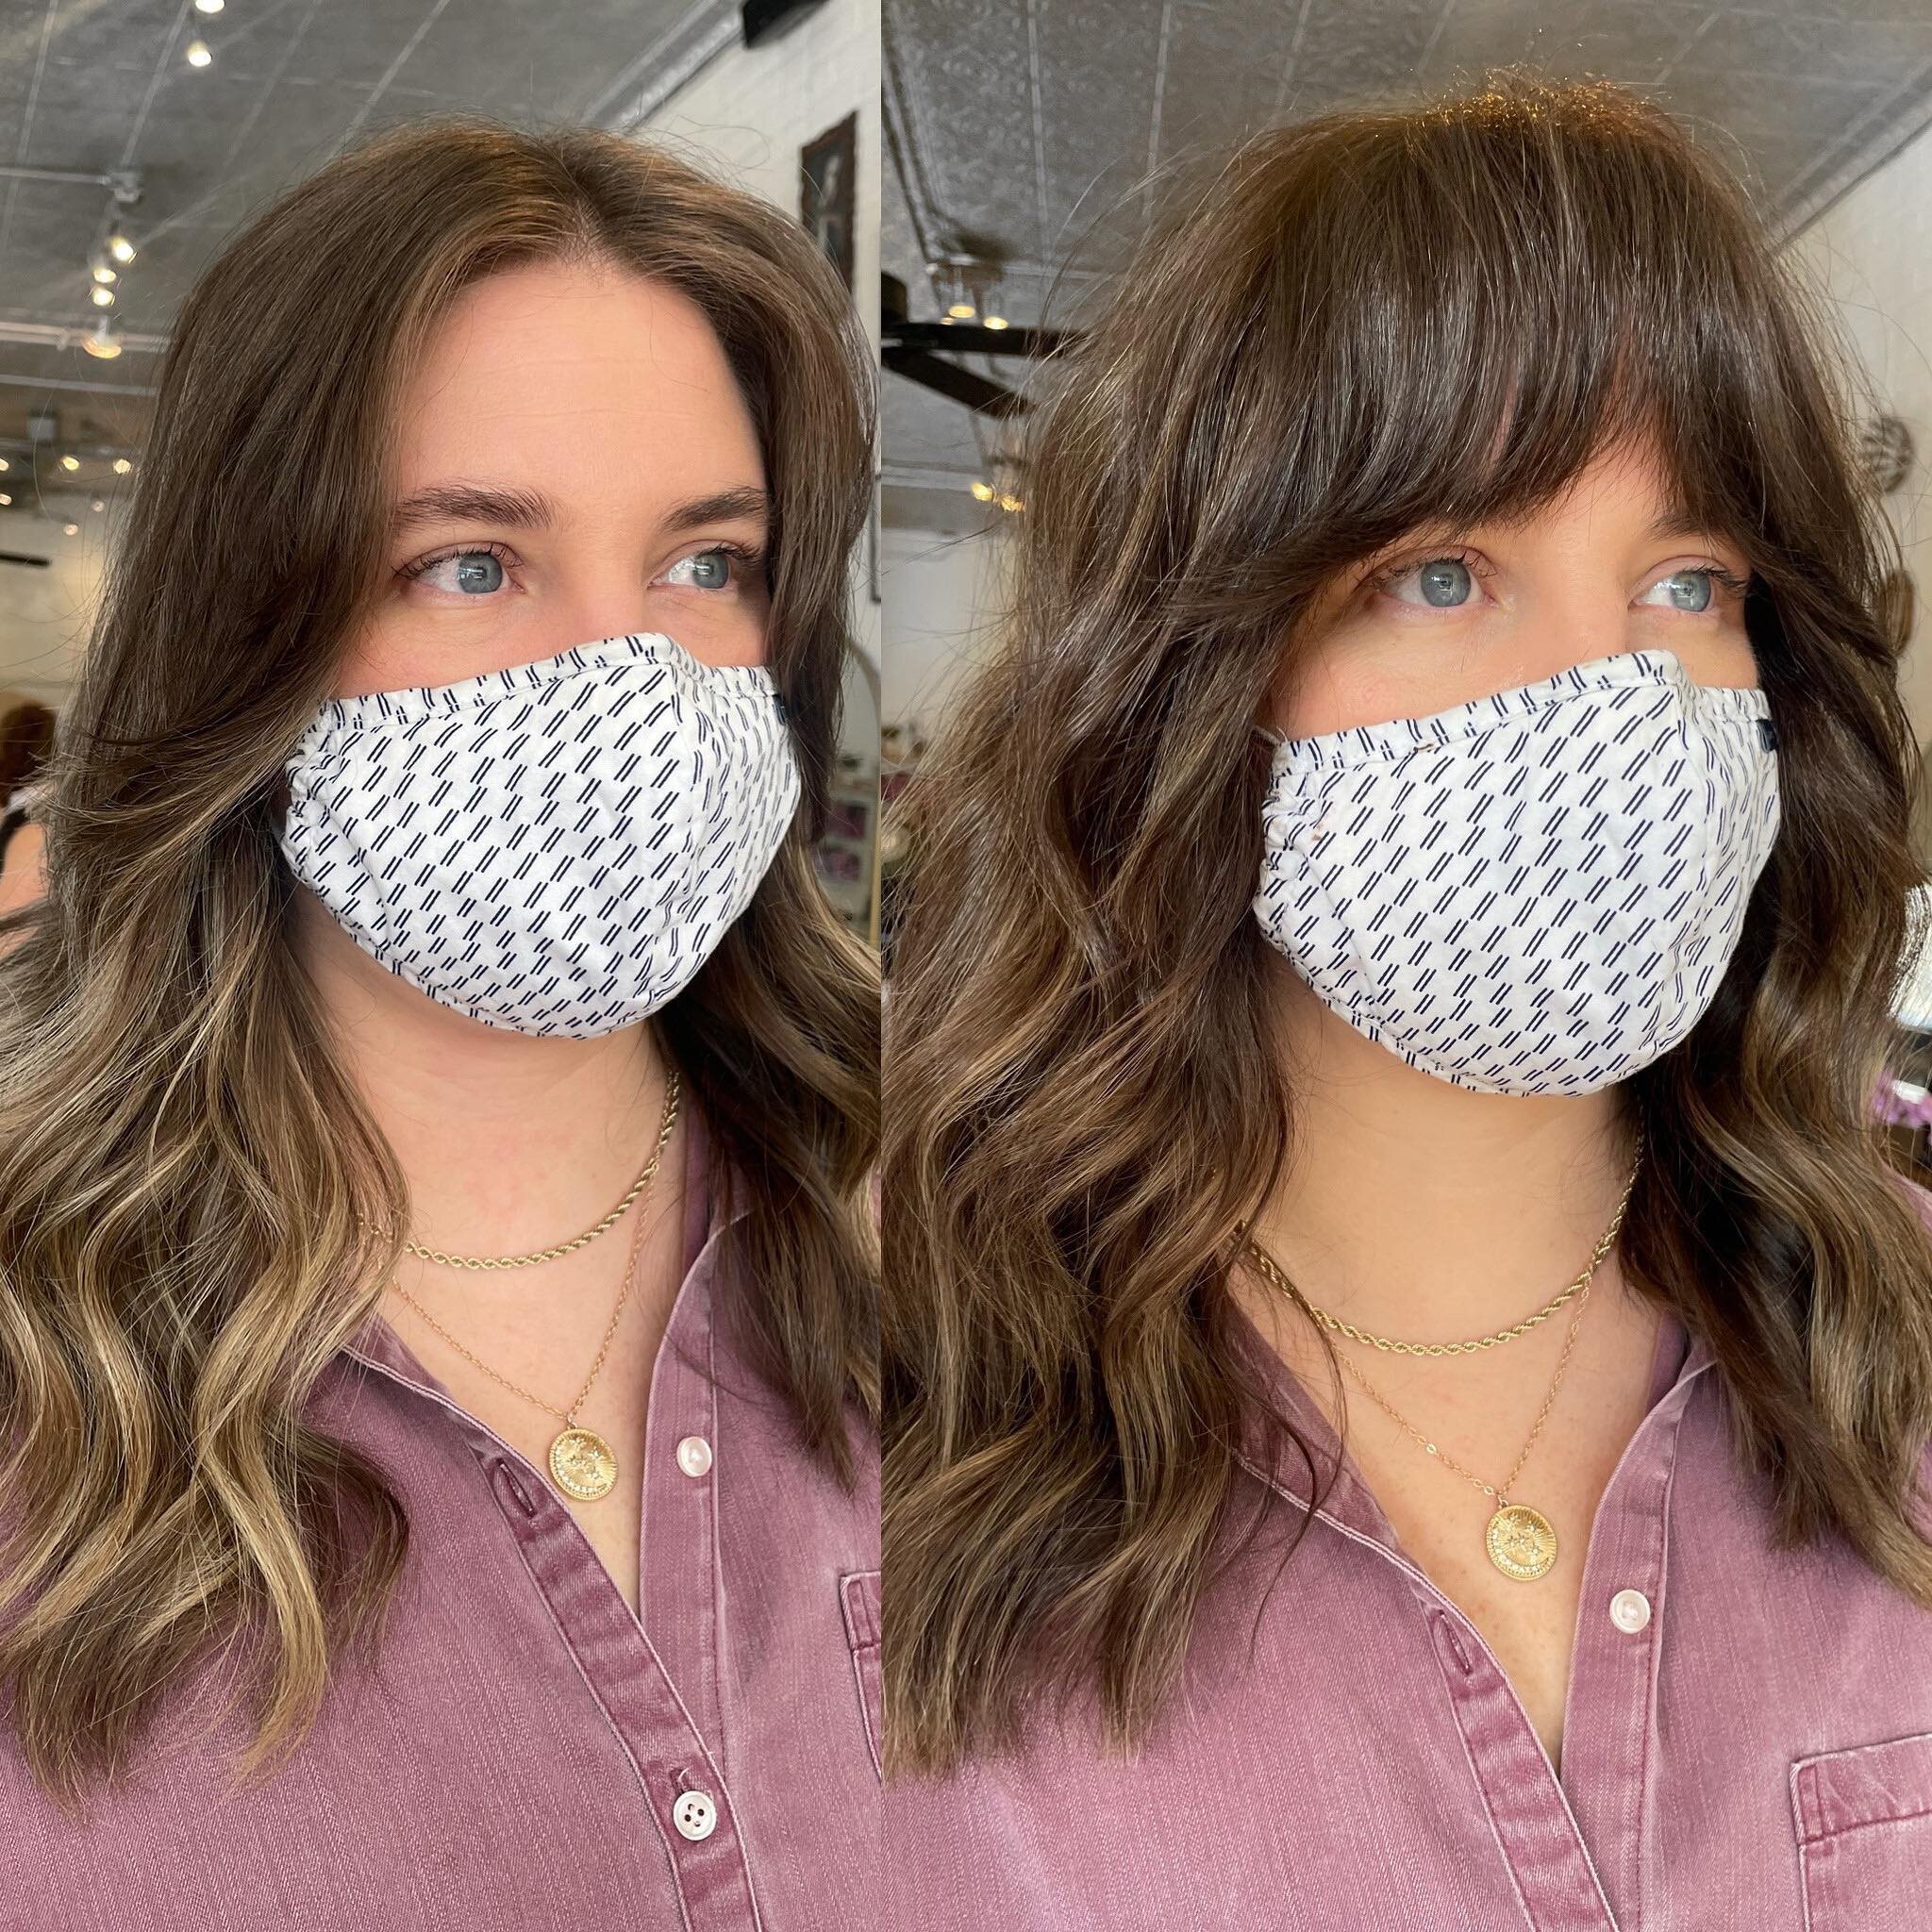 LOVE when y&rsquo;all wanna switch things up a bit! Brought the bangs back and decided on a color closer to their natural with a subtle pop of dimension still in there👌 
&bull; hair by Hillary &bull;